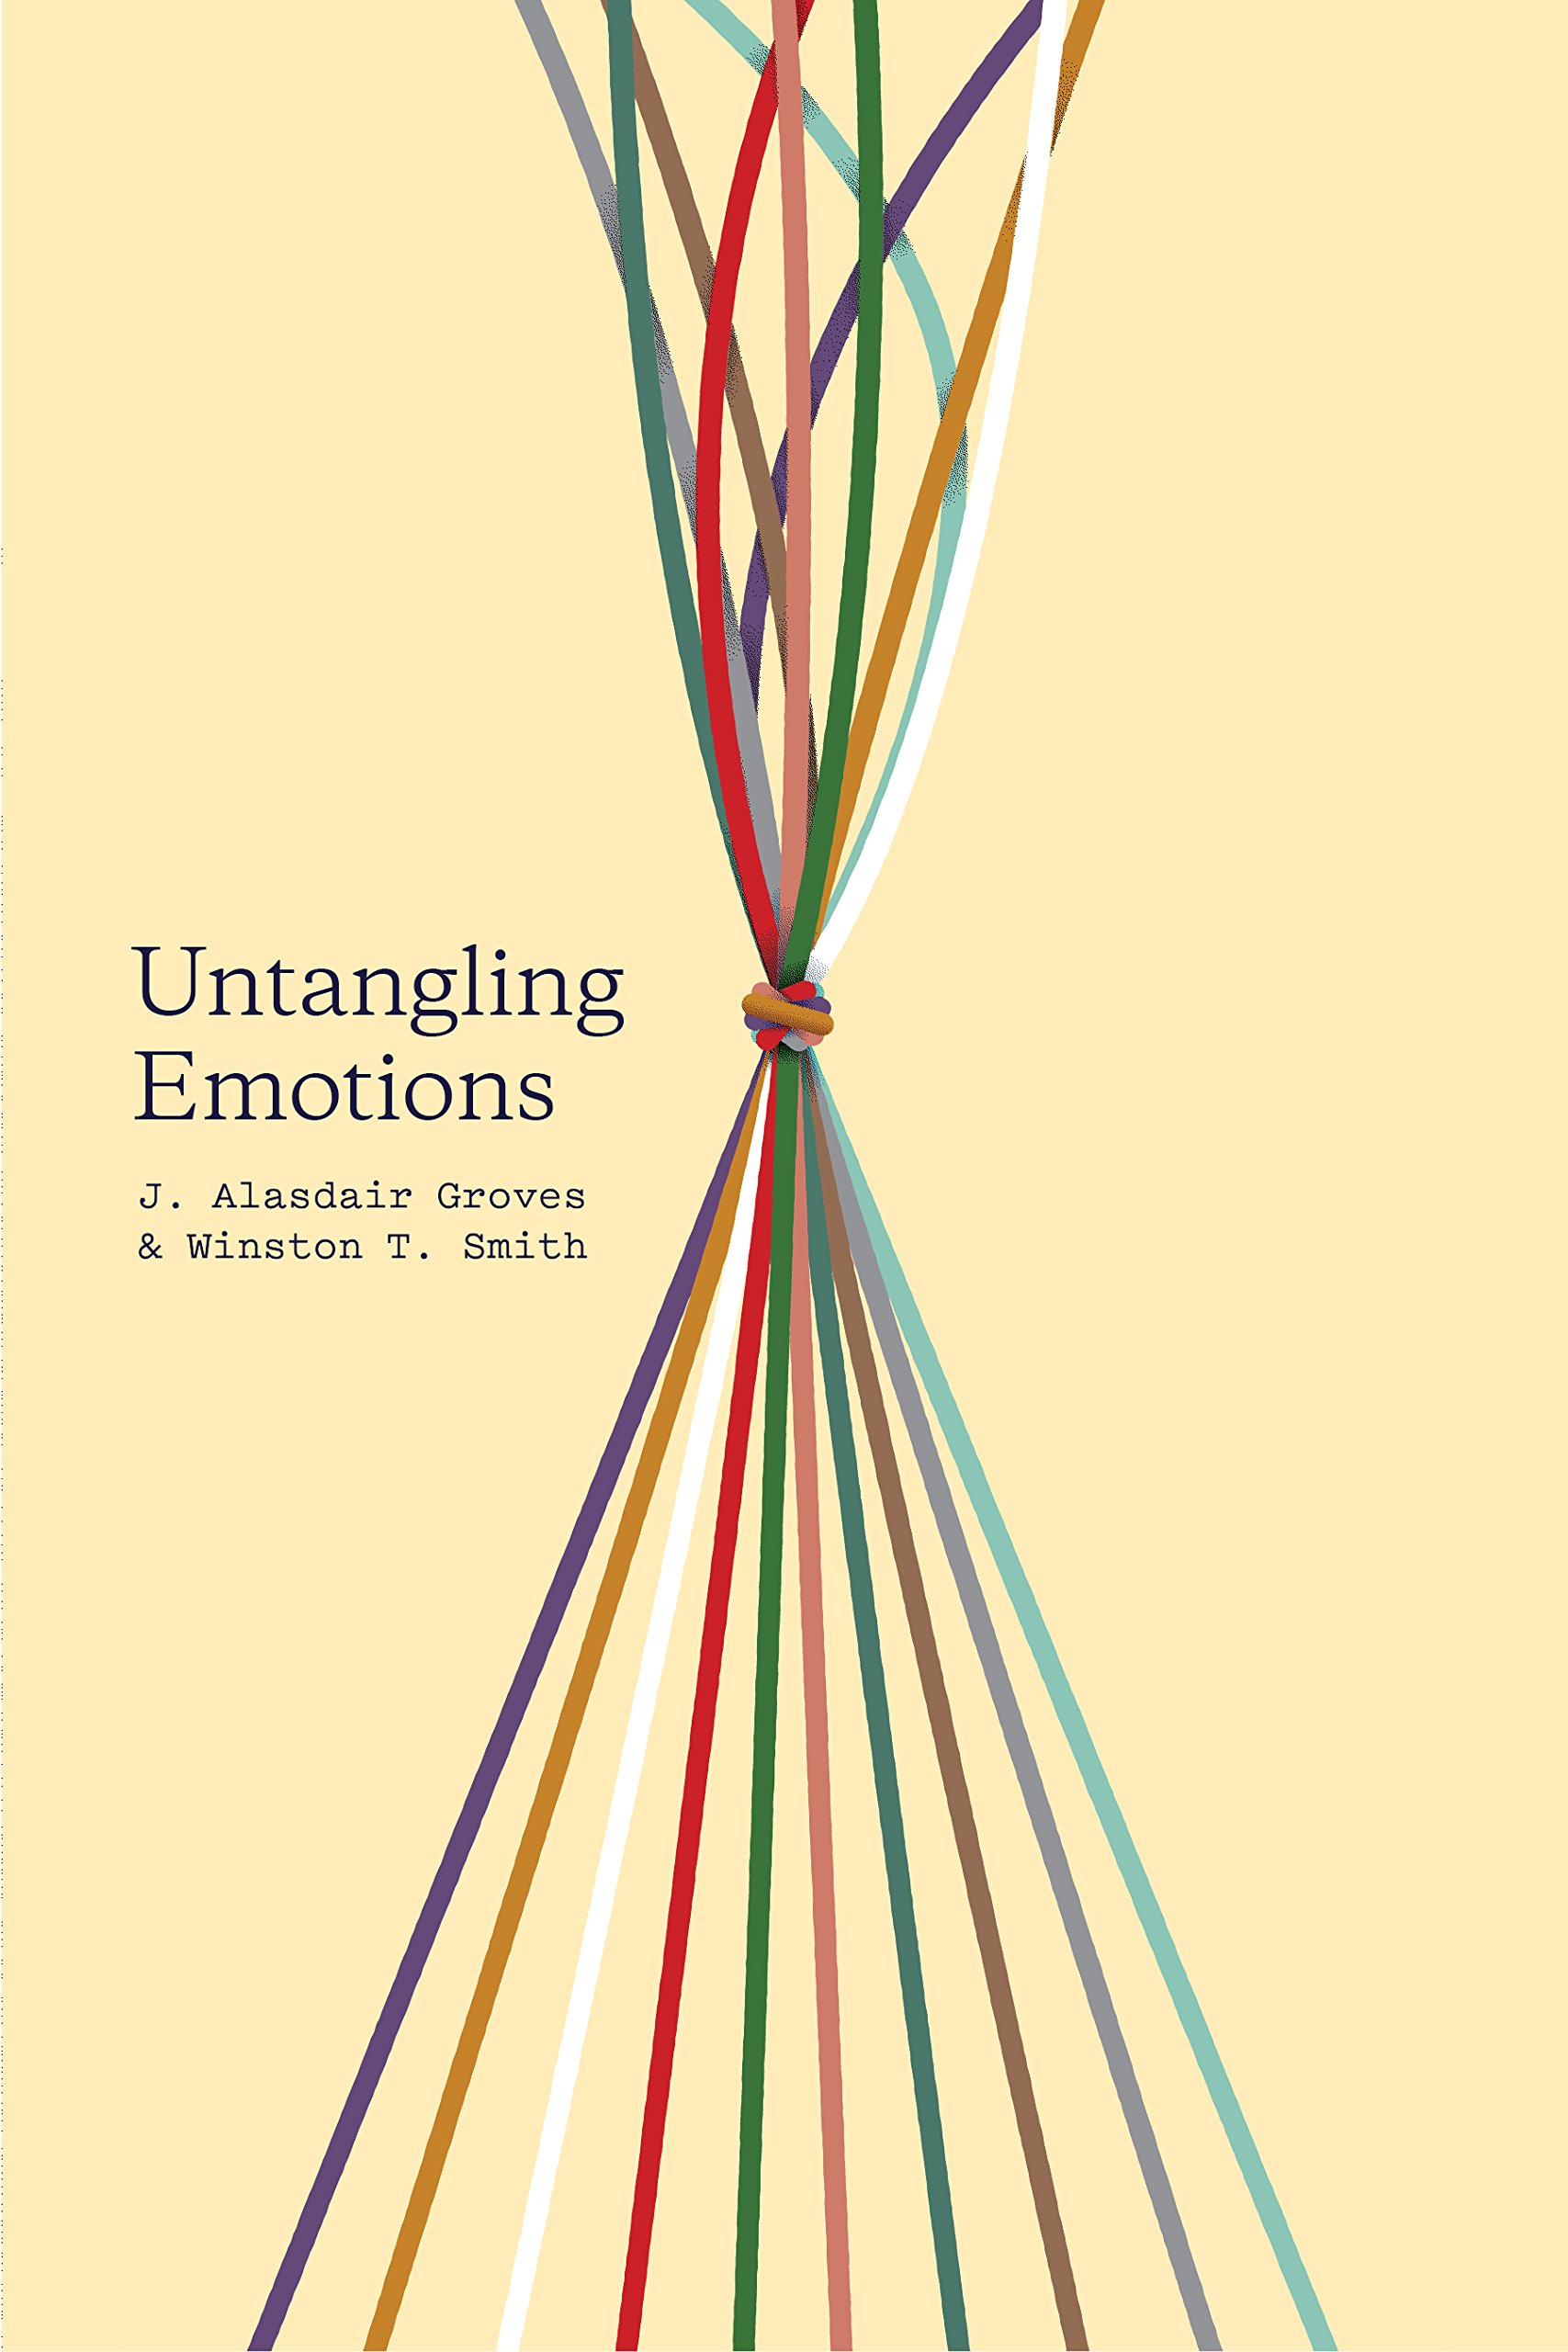 Book Notice: UNTANGLING EMOTIONS: “GOD’S GIFT OF EMOTIONS,” by J. Alasdair Groves and Winston T. Smith